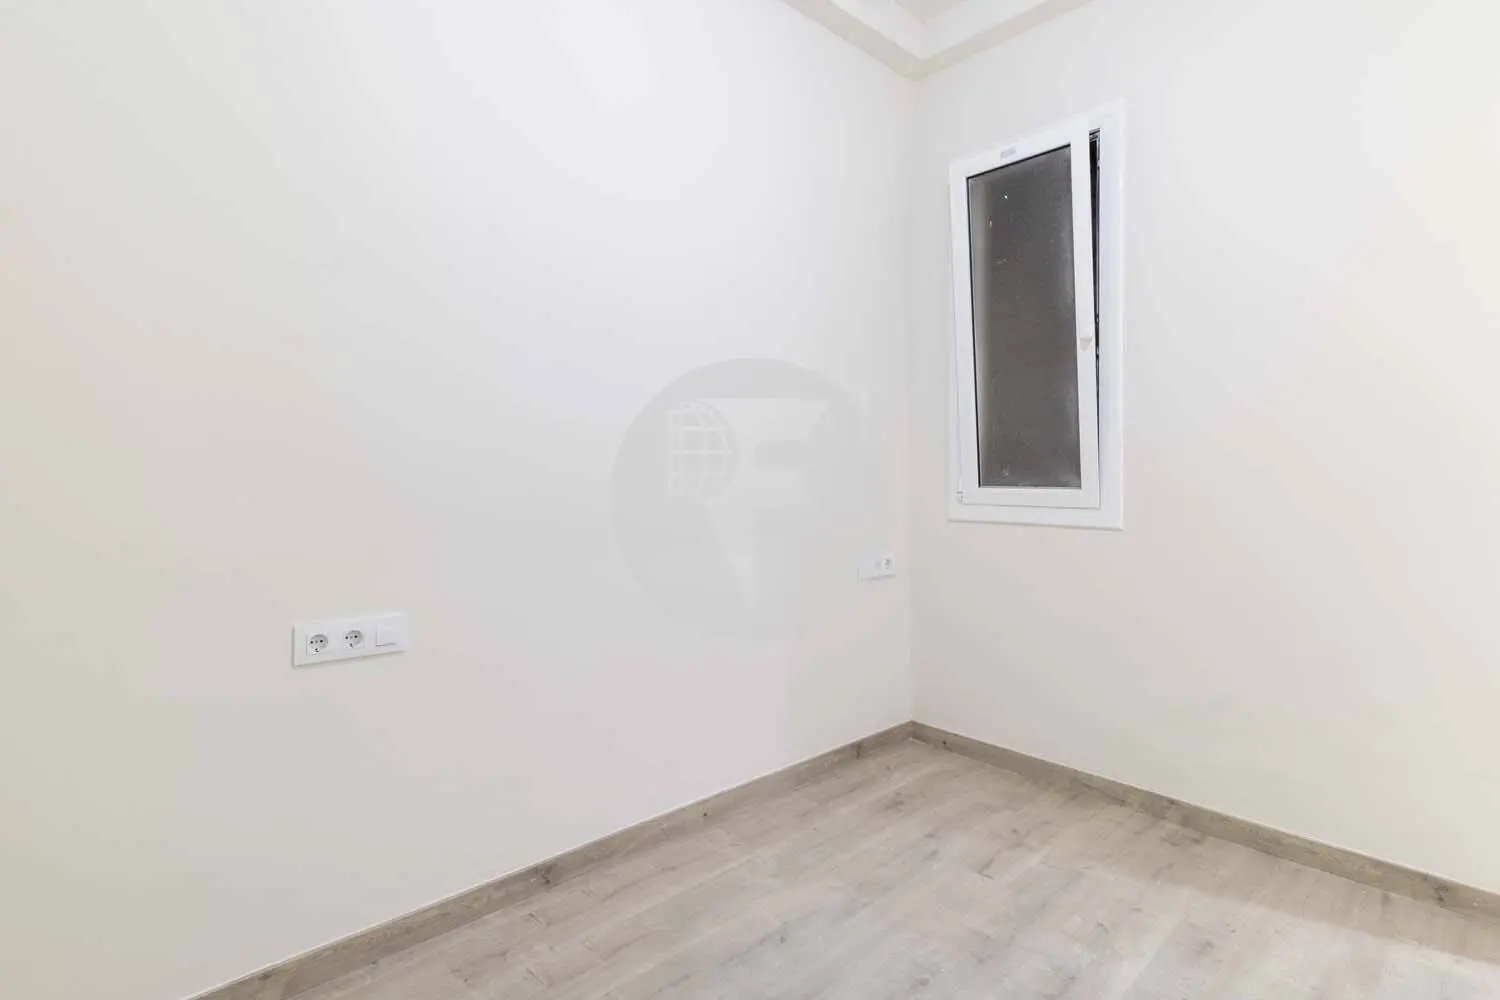 Renovated to brand new apartment in Rocafort street 6